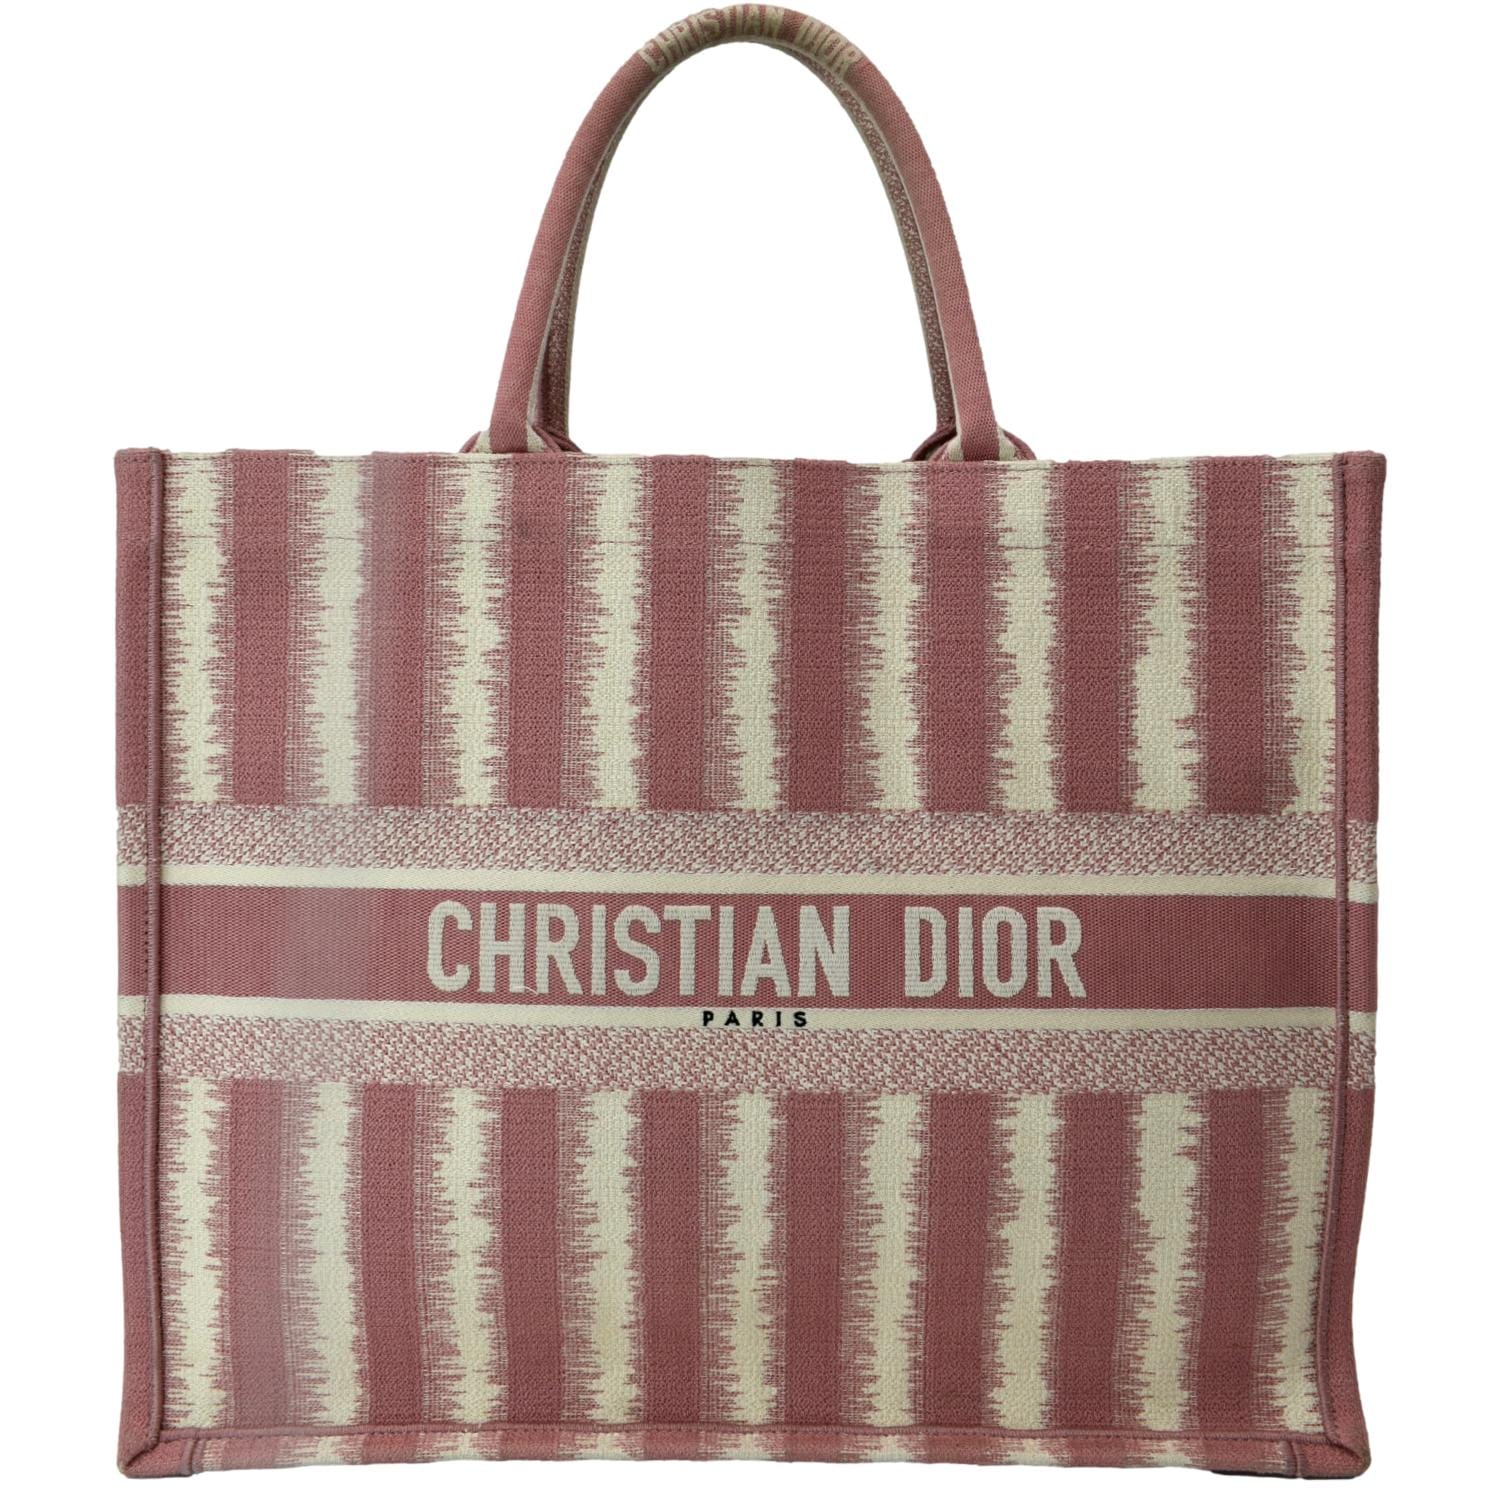 CHRISTIAN DIOR Book Stripe Embroidered Canvas Tote Bag Pink